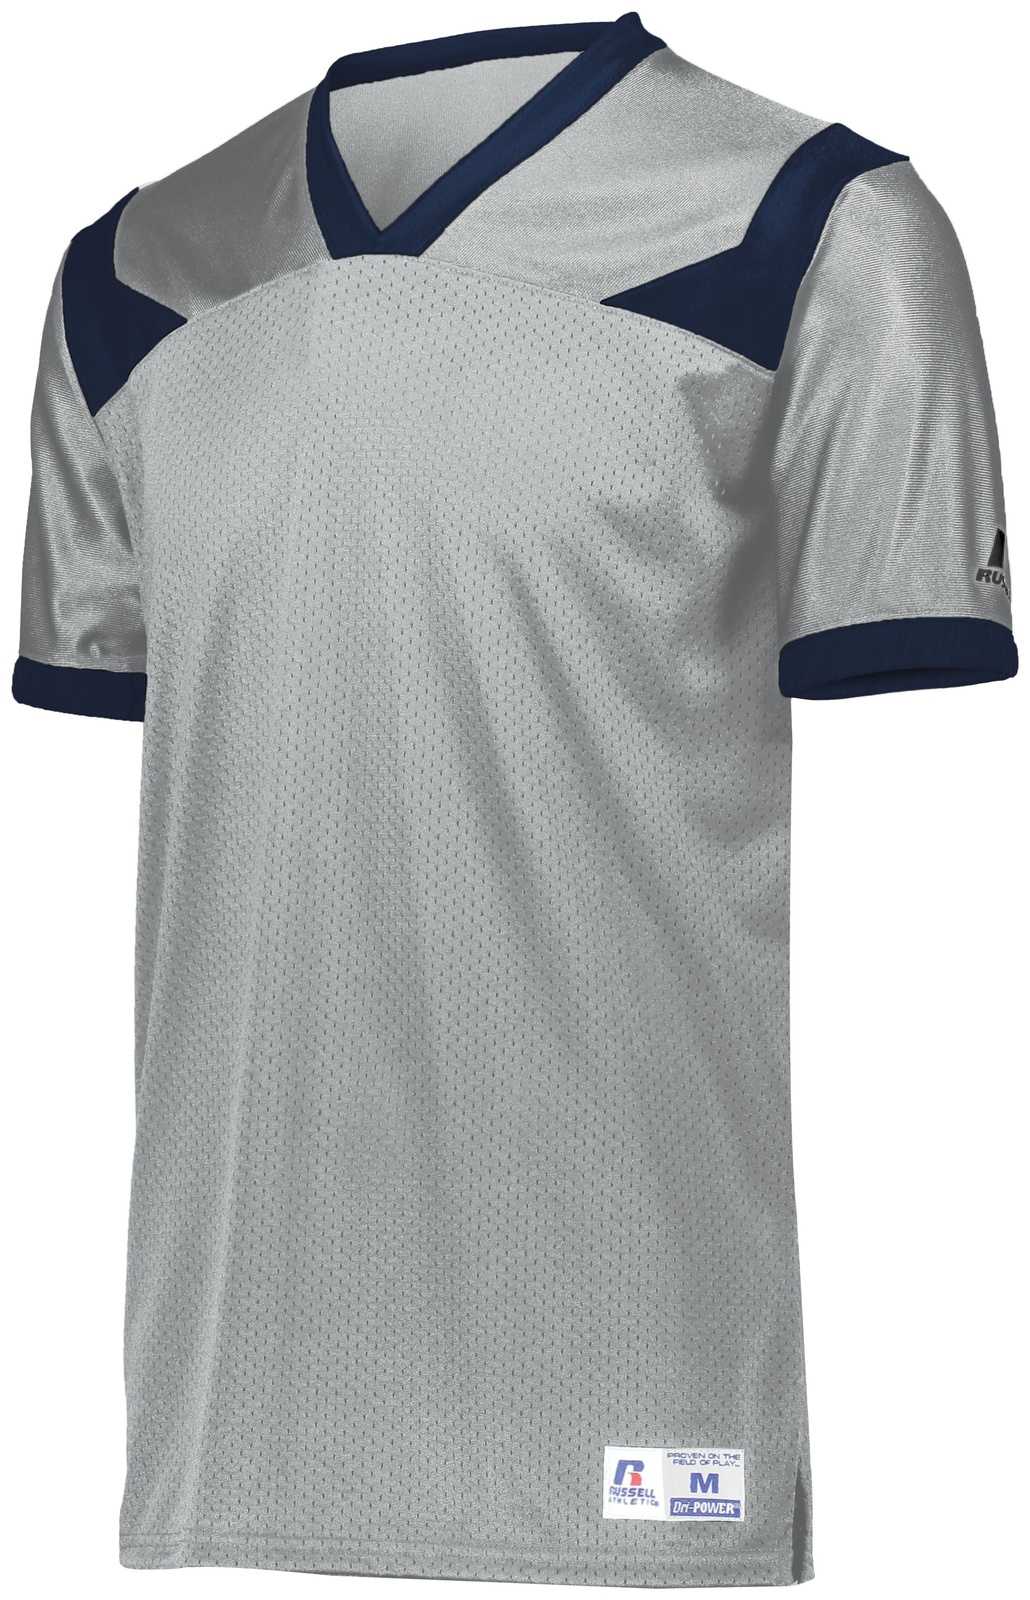 N4190 A4 All Porthole Football Practice Jersey